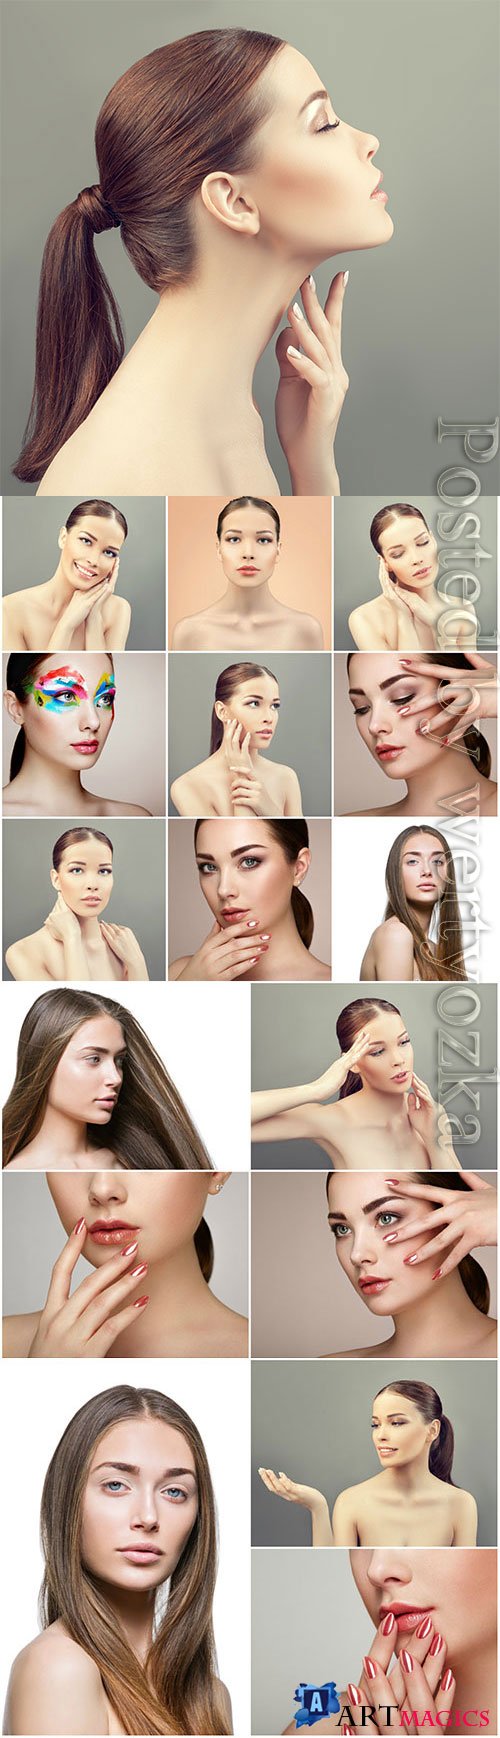 Beautiful well groomed young women stock photo